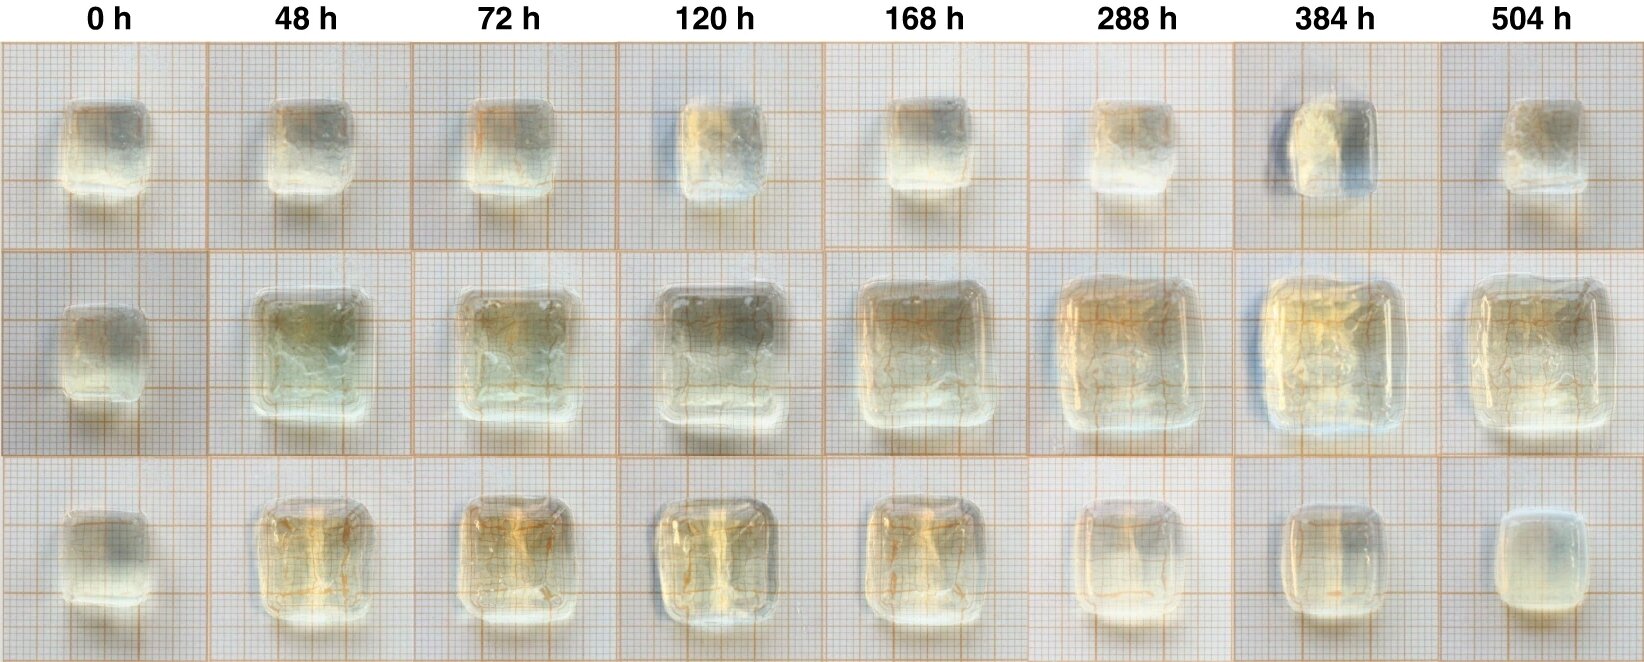 Time-lapse photo series of a hydrogel with fuel added (middle row) compared with a control hydrogel to which nothing has been added (top row), over a three-week period (504 hours). The bottom row shows a hydrogel that changes shape independently when two different types of fuel are added. Credit: TU Delft